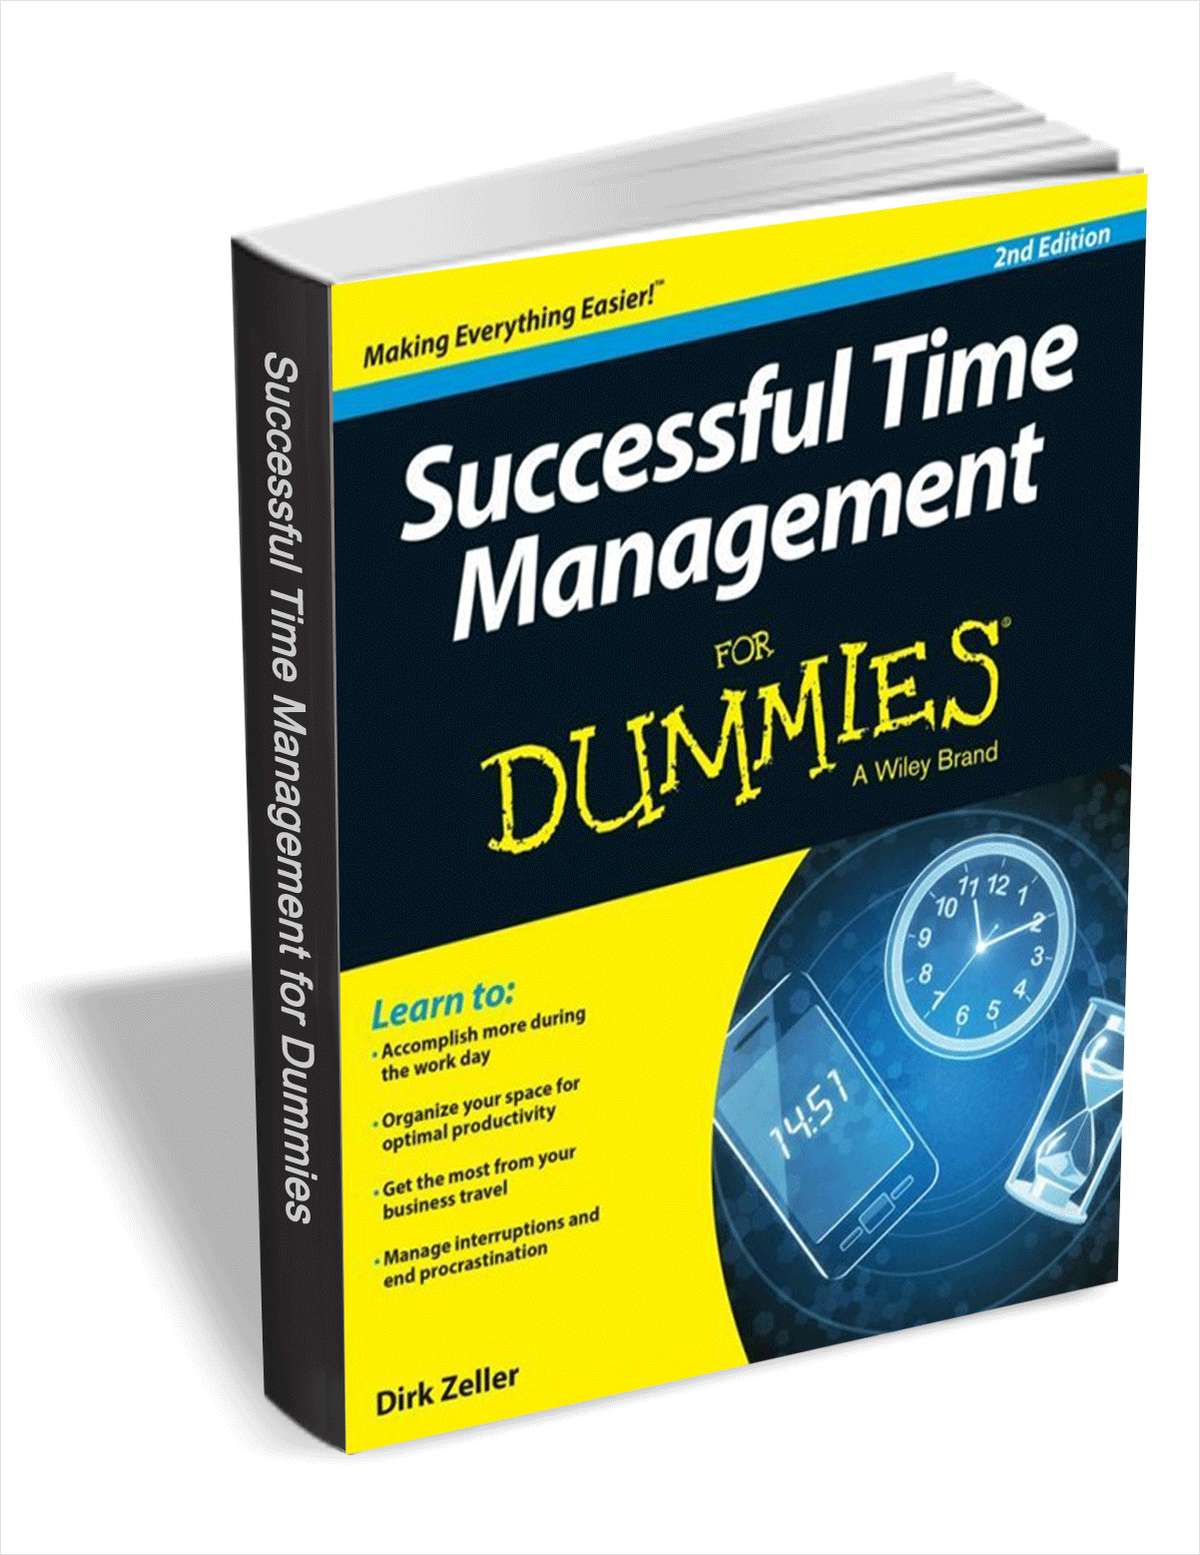 Successful Time Management For Dummies, 2nd Edition ($12 Value) FREE For a Limited Time